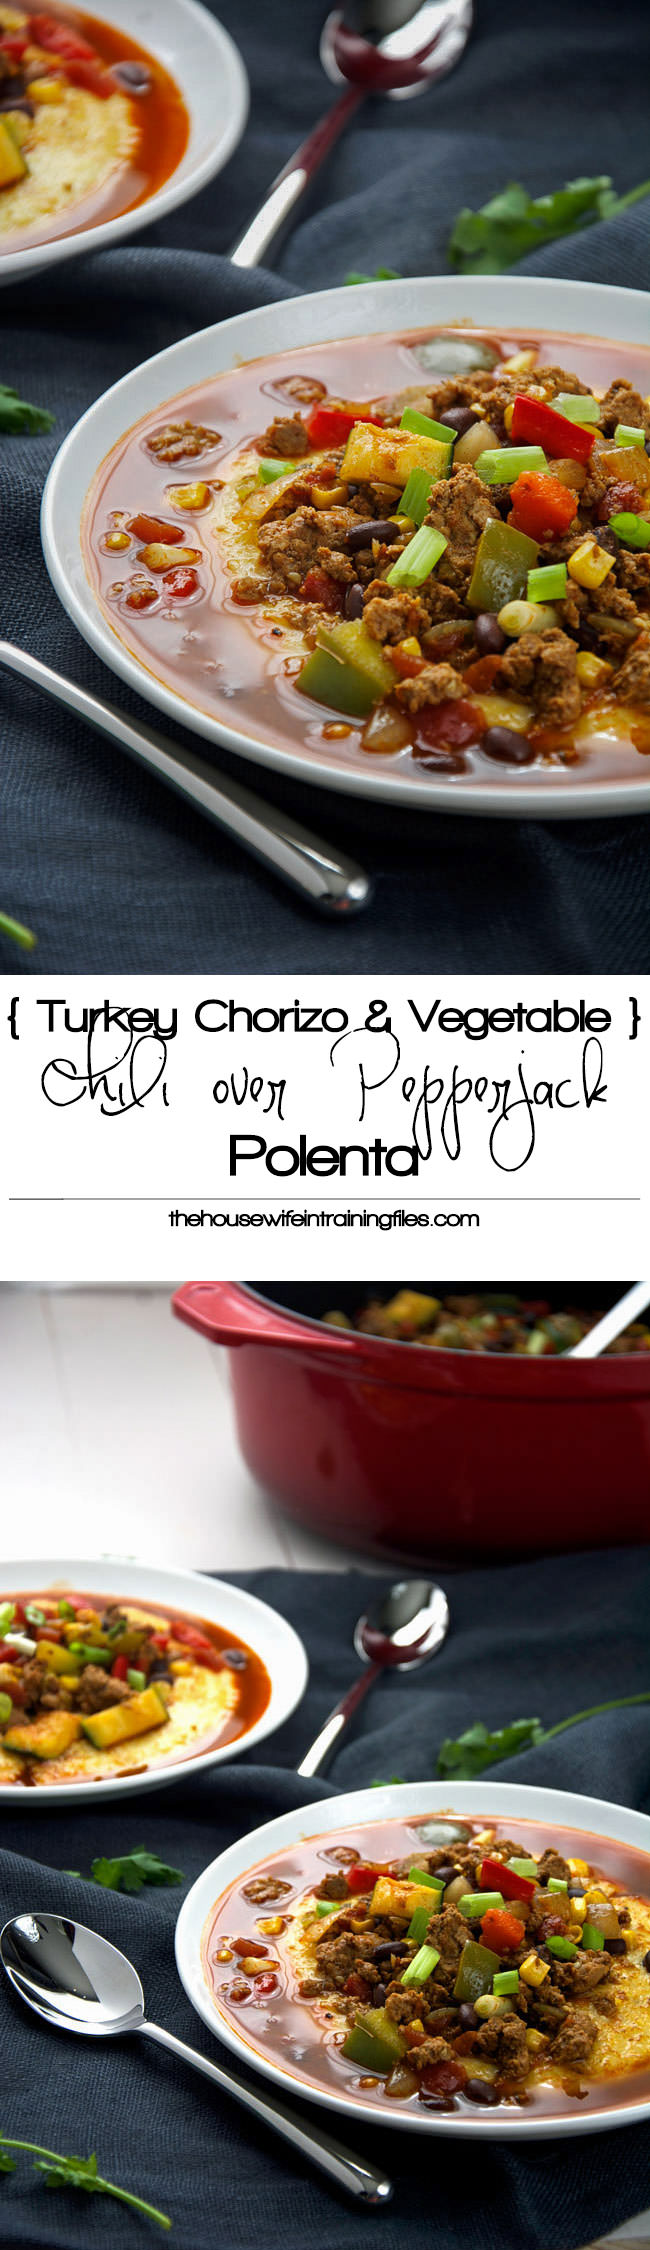 A loaded, spicy vegetable chili made with homemade turkey chorizo that sits in a bed of creamy, pepperjack polenta!  